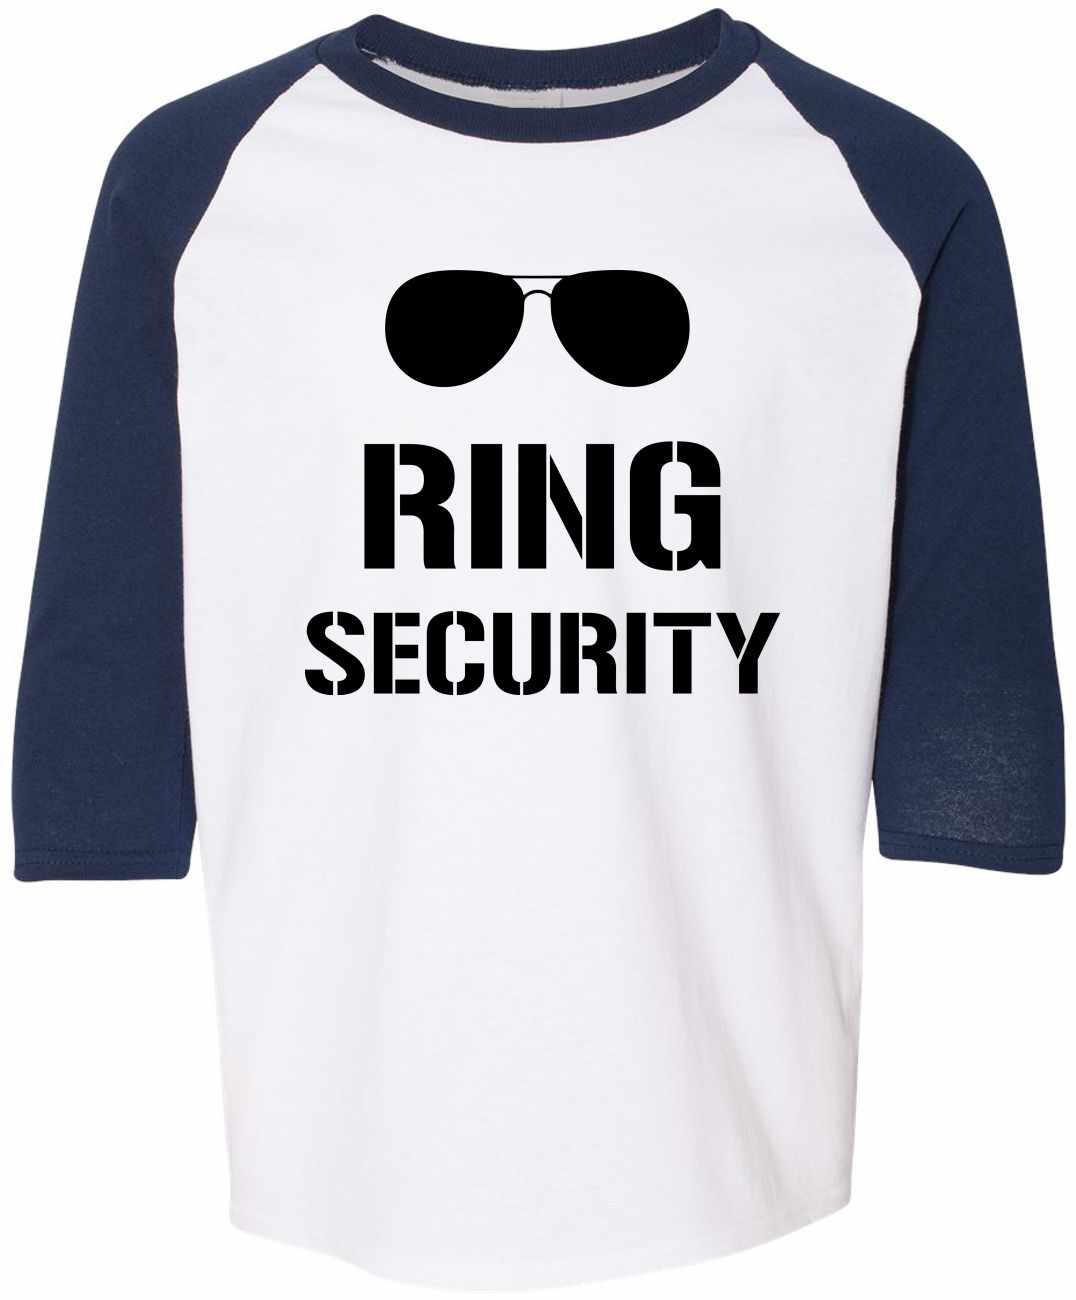 Ring Security on Youth Baseball Shirt (#1011-212)